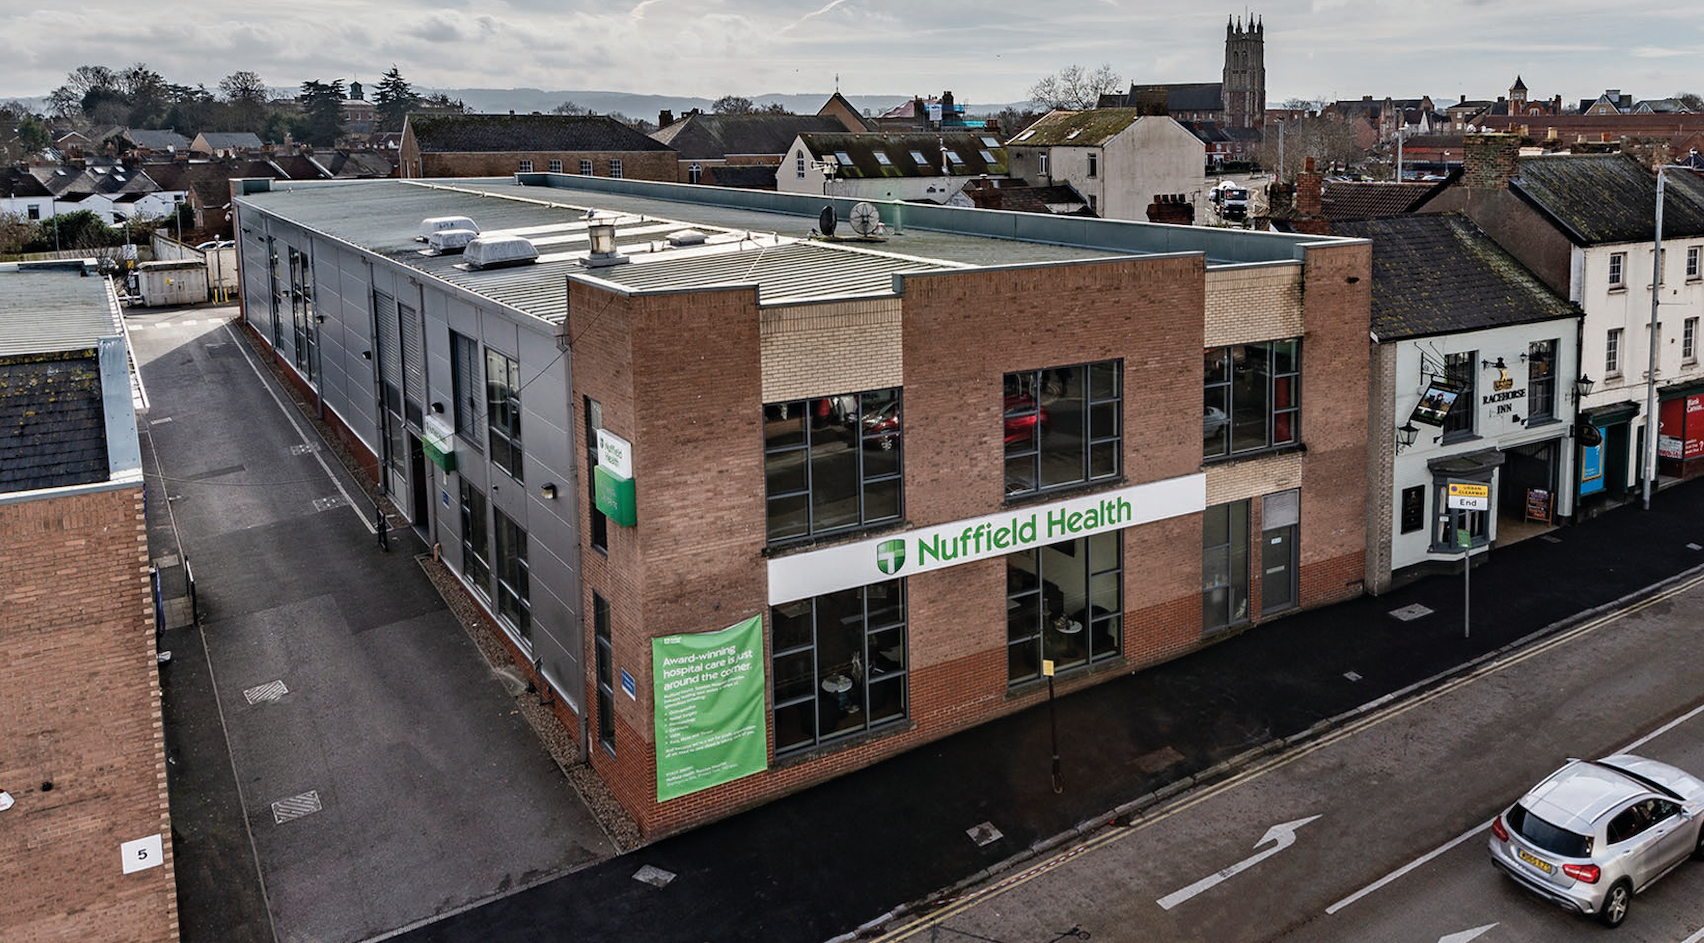 Nuffield Health & Fitness Club investment in Taunton